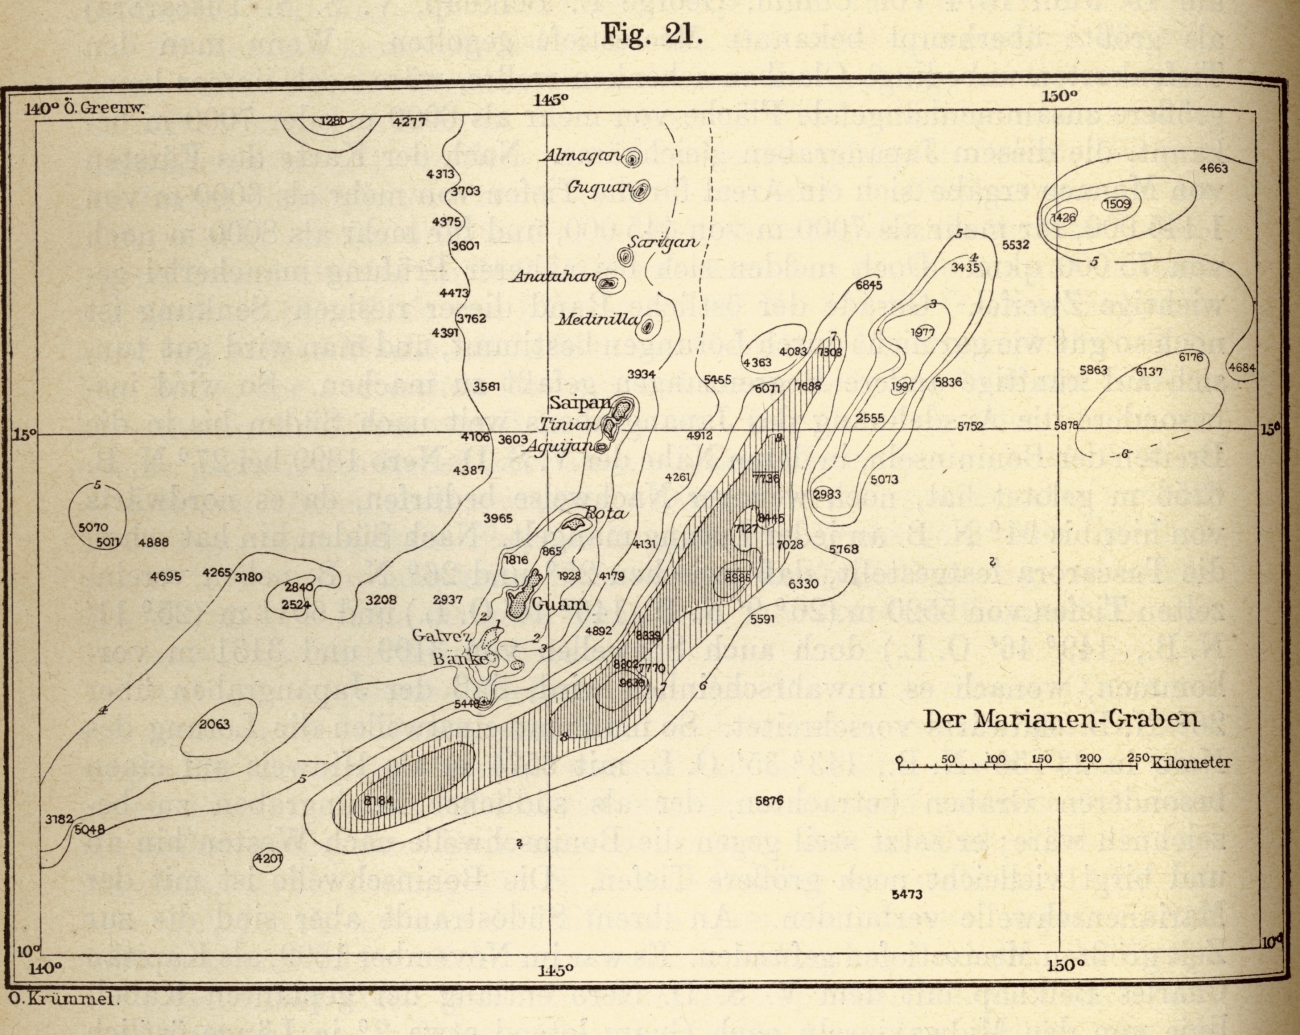 Otto Krummel's map of the Mariana Trench